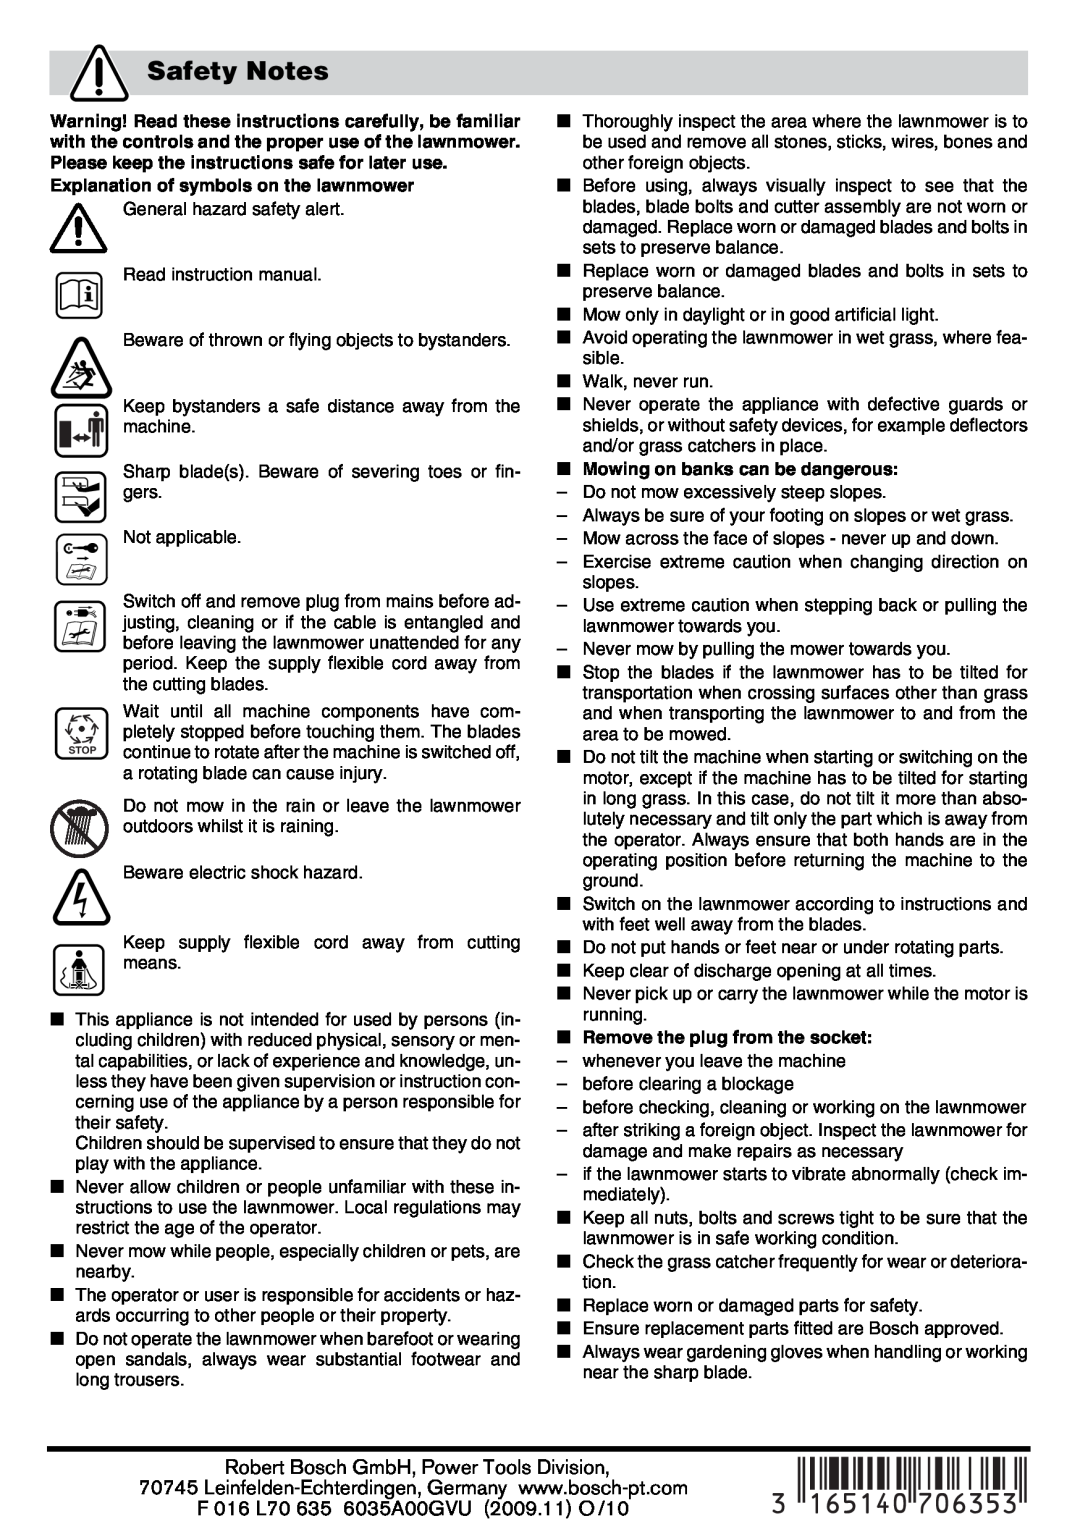 Bosch Appliances Rotak 34 Safety Notes, F 016 L70 635 6035A00GVU 2009.11 O /10, Explanation of symbols on the lawnmower 